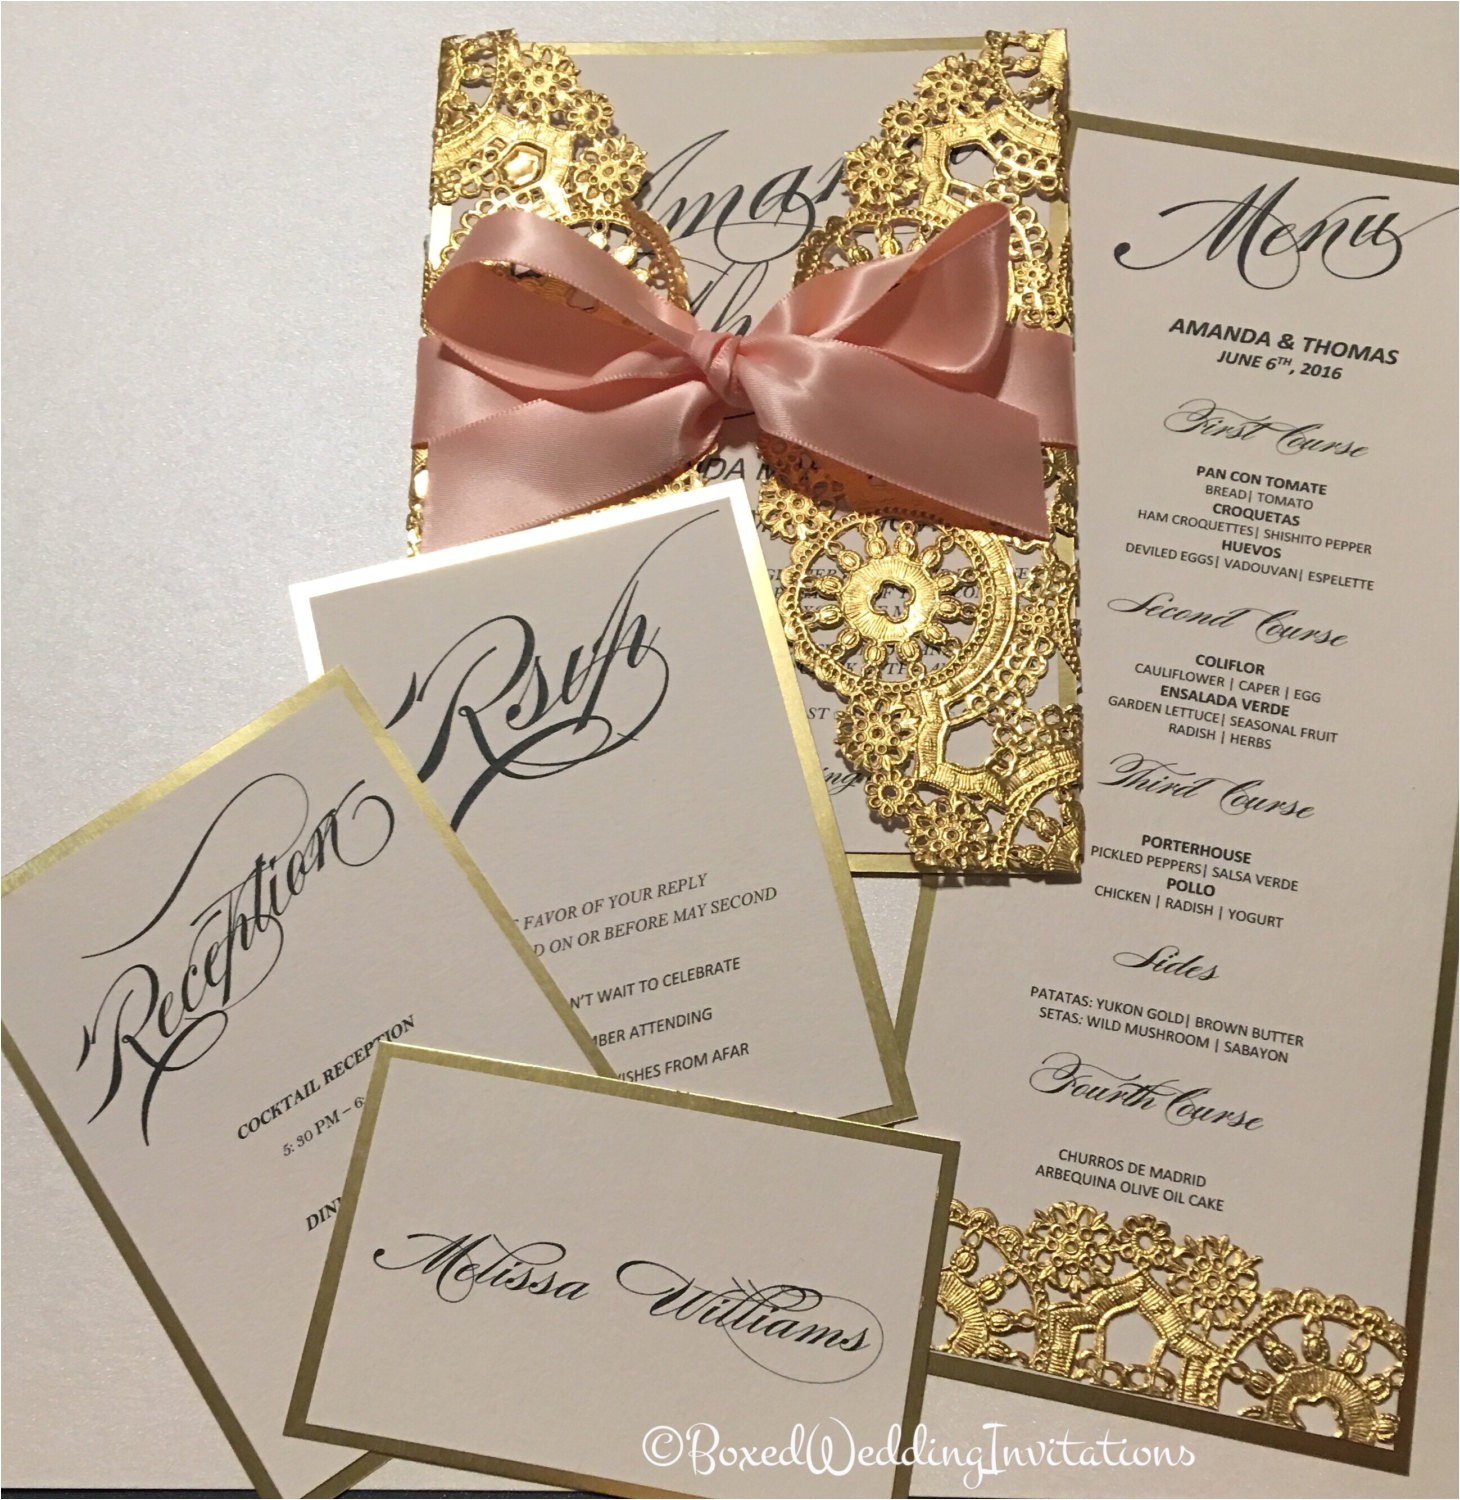 Invitation Cards for Quinceanera Gold Invitation Card Save the Date Invitation Quinceanera